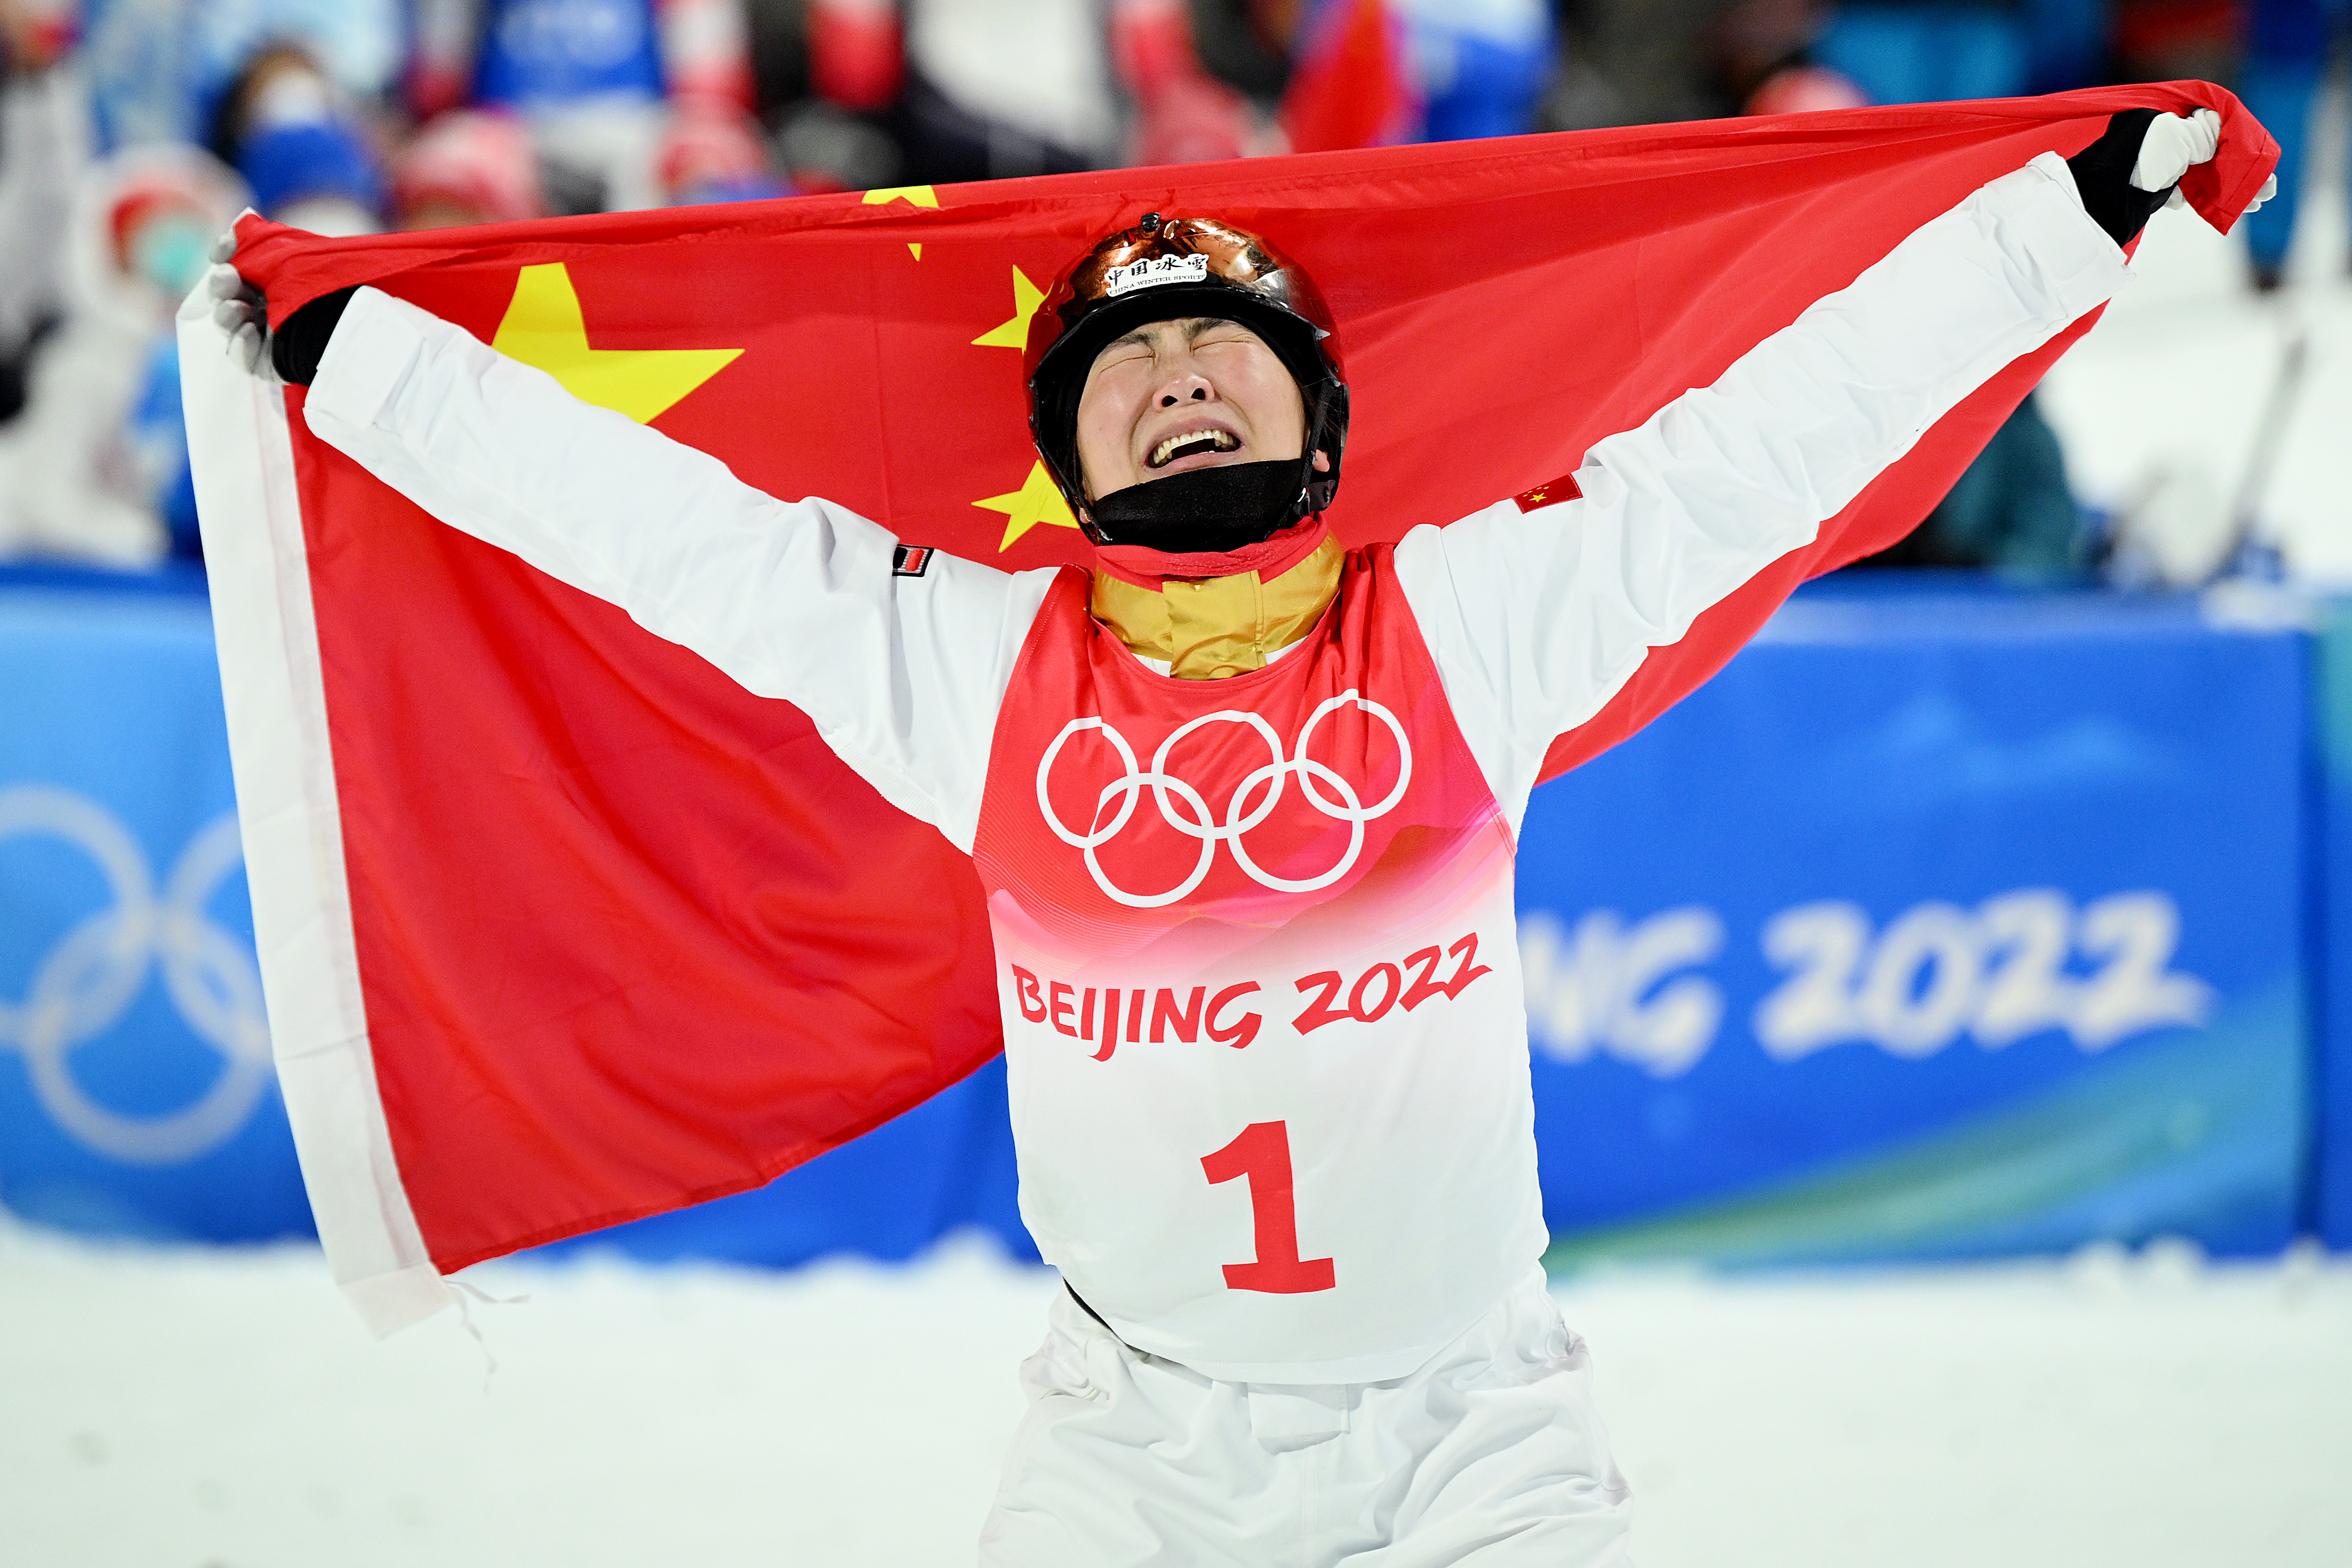 China's Xu Mengtao reacts to winning the gold medal during the women's freestyle skiing aerials final at Genting Snow Park on February 14.